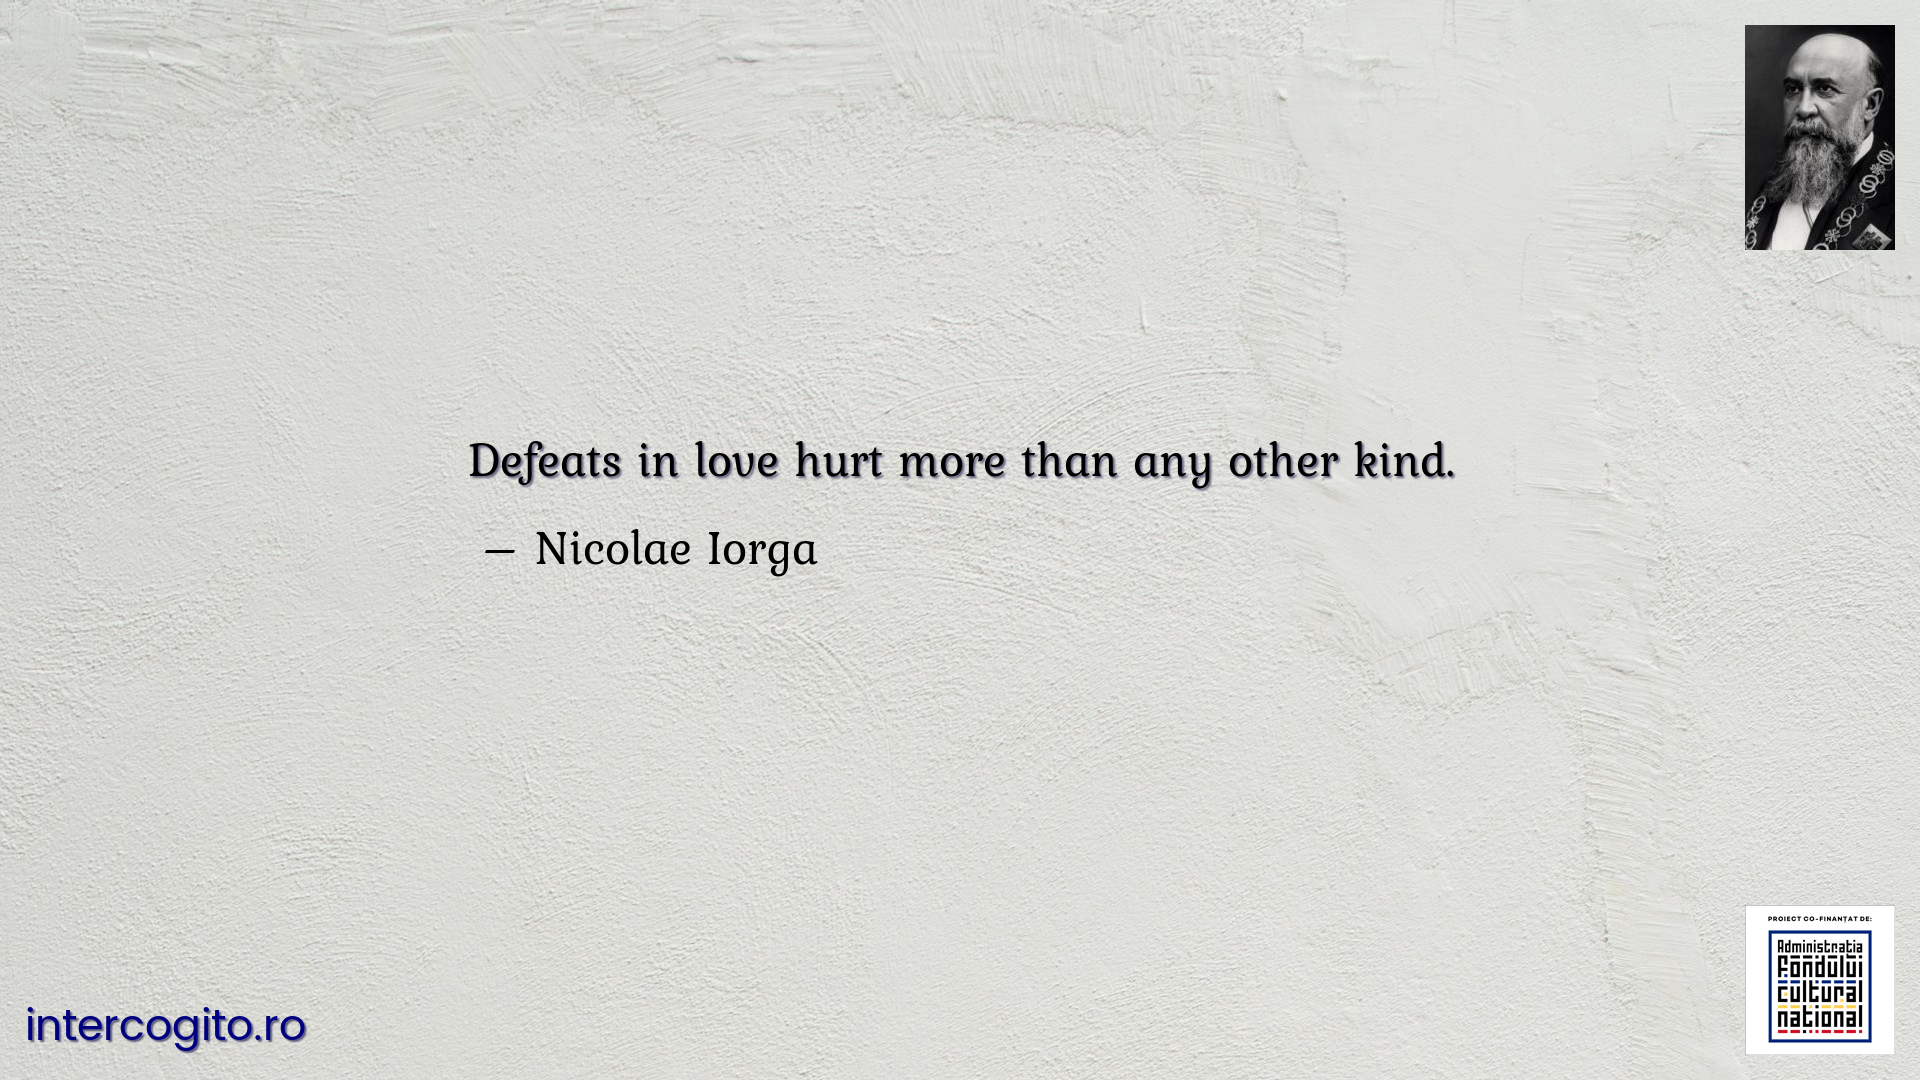 Defeats in love hurt more than any other kind.